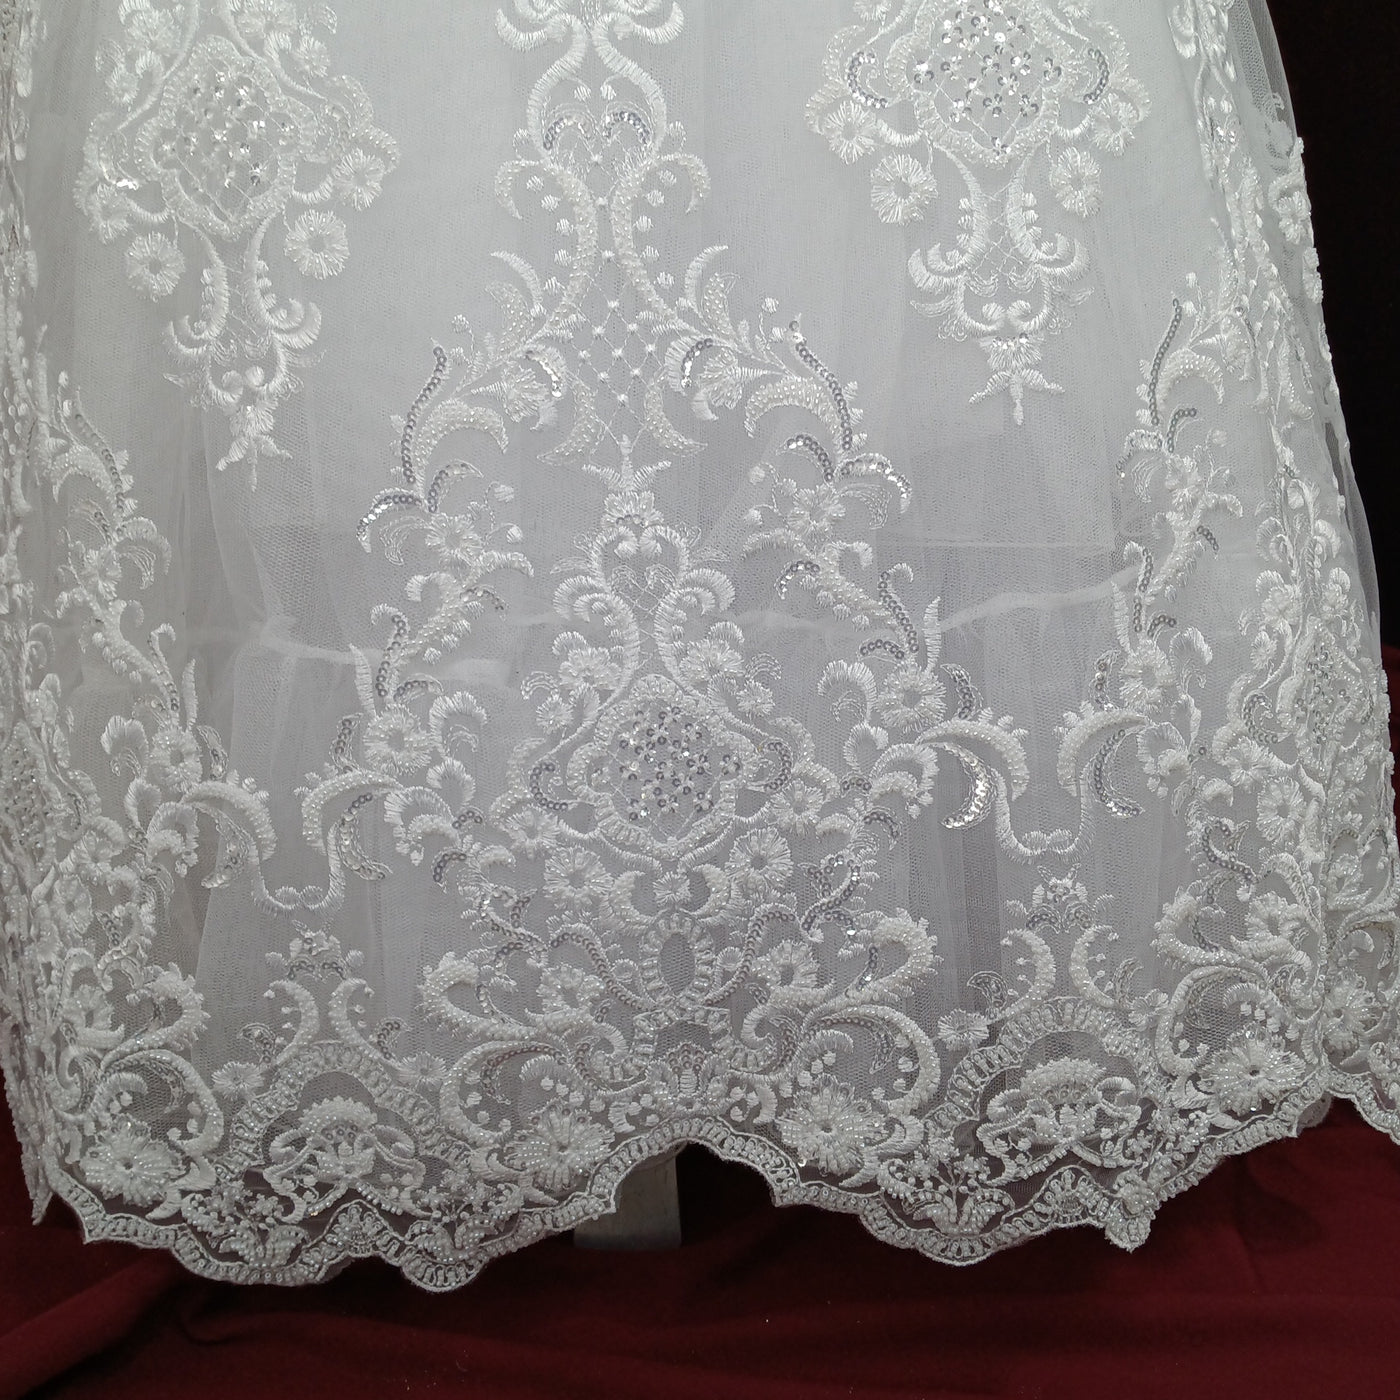 Embroidered & Heavy Beaded Net Fabric with Beads. Lace Usa